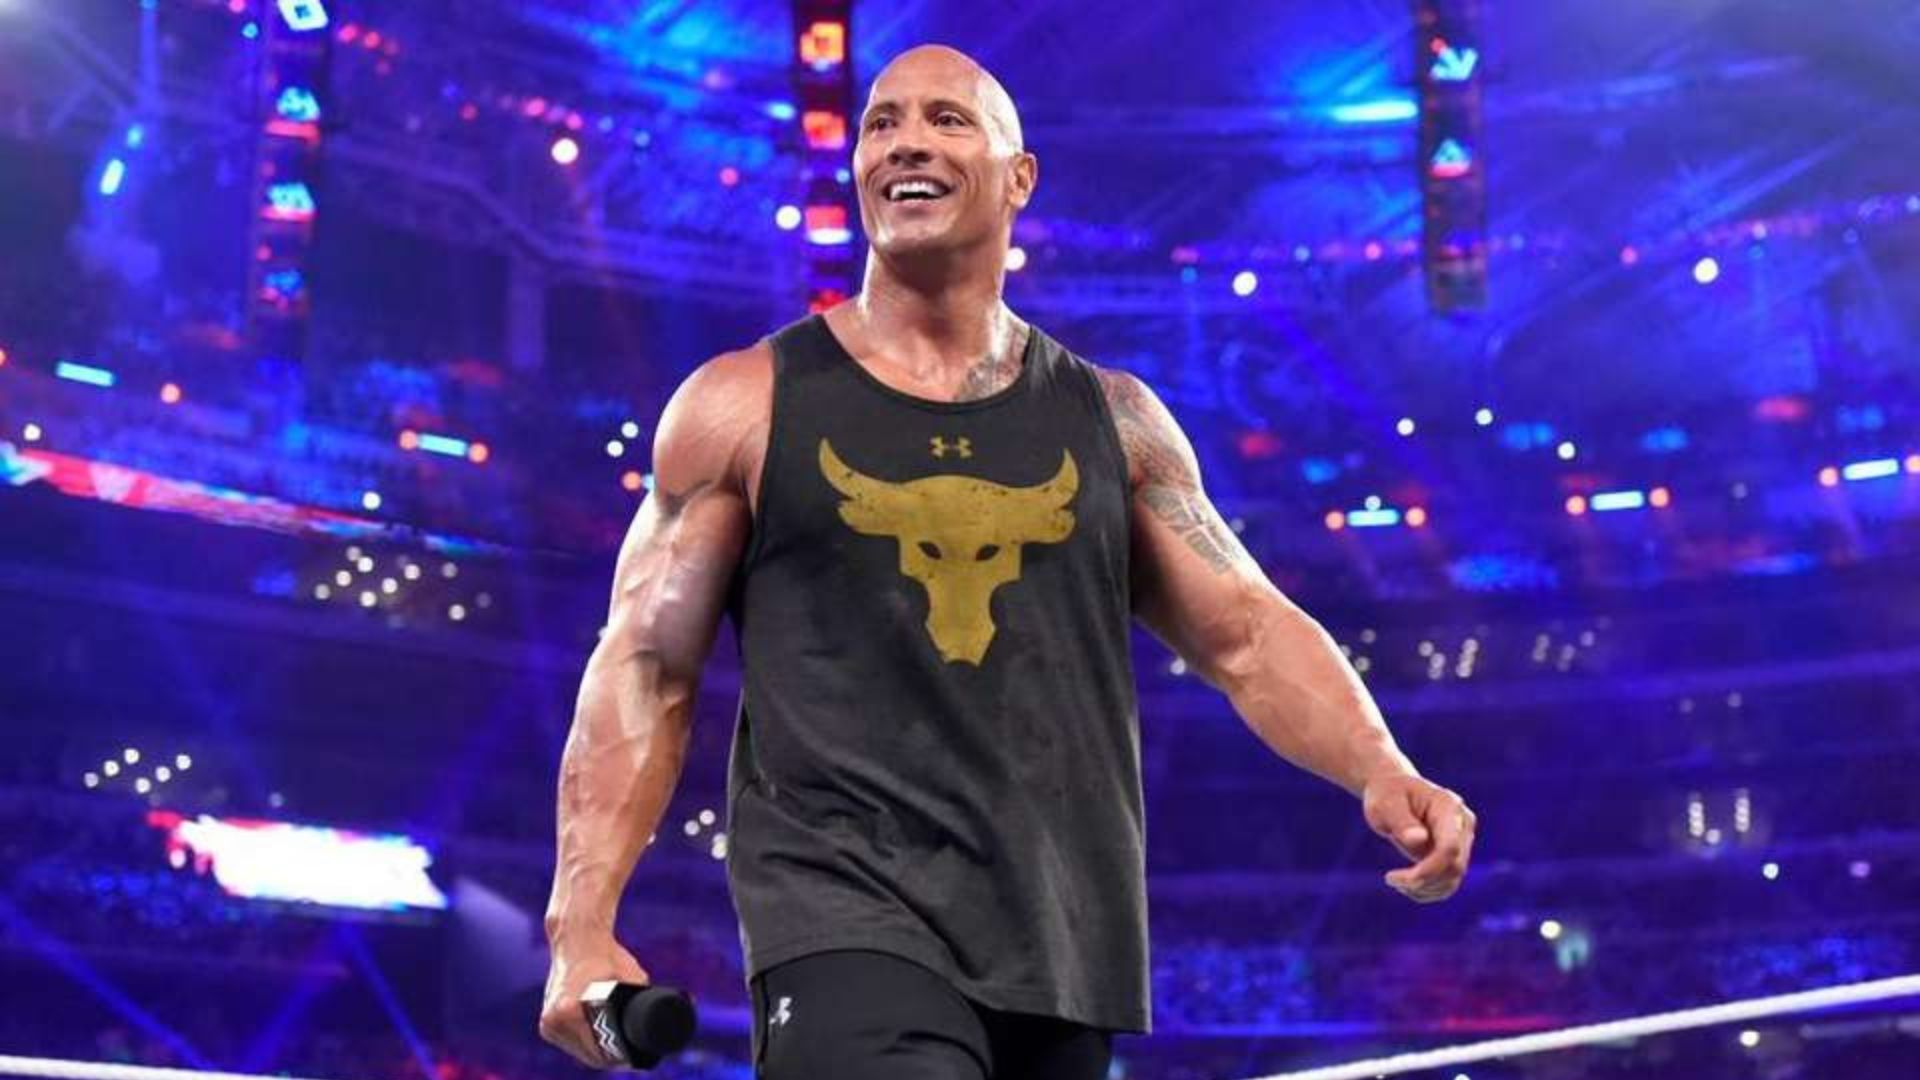 Will The Rock return at WrestleMania 39?